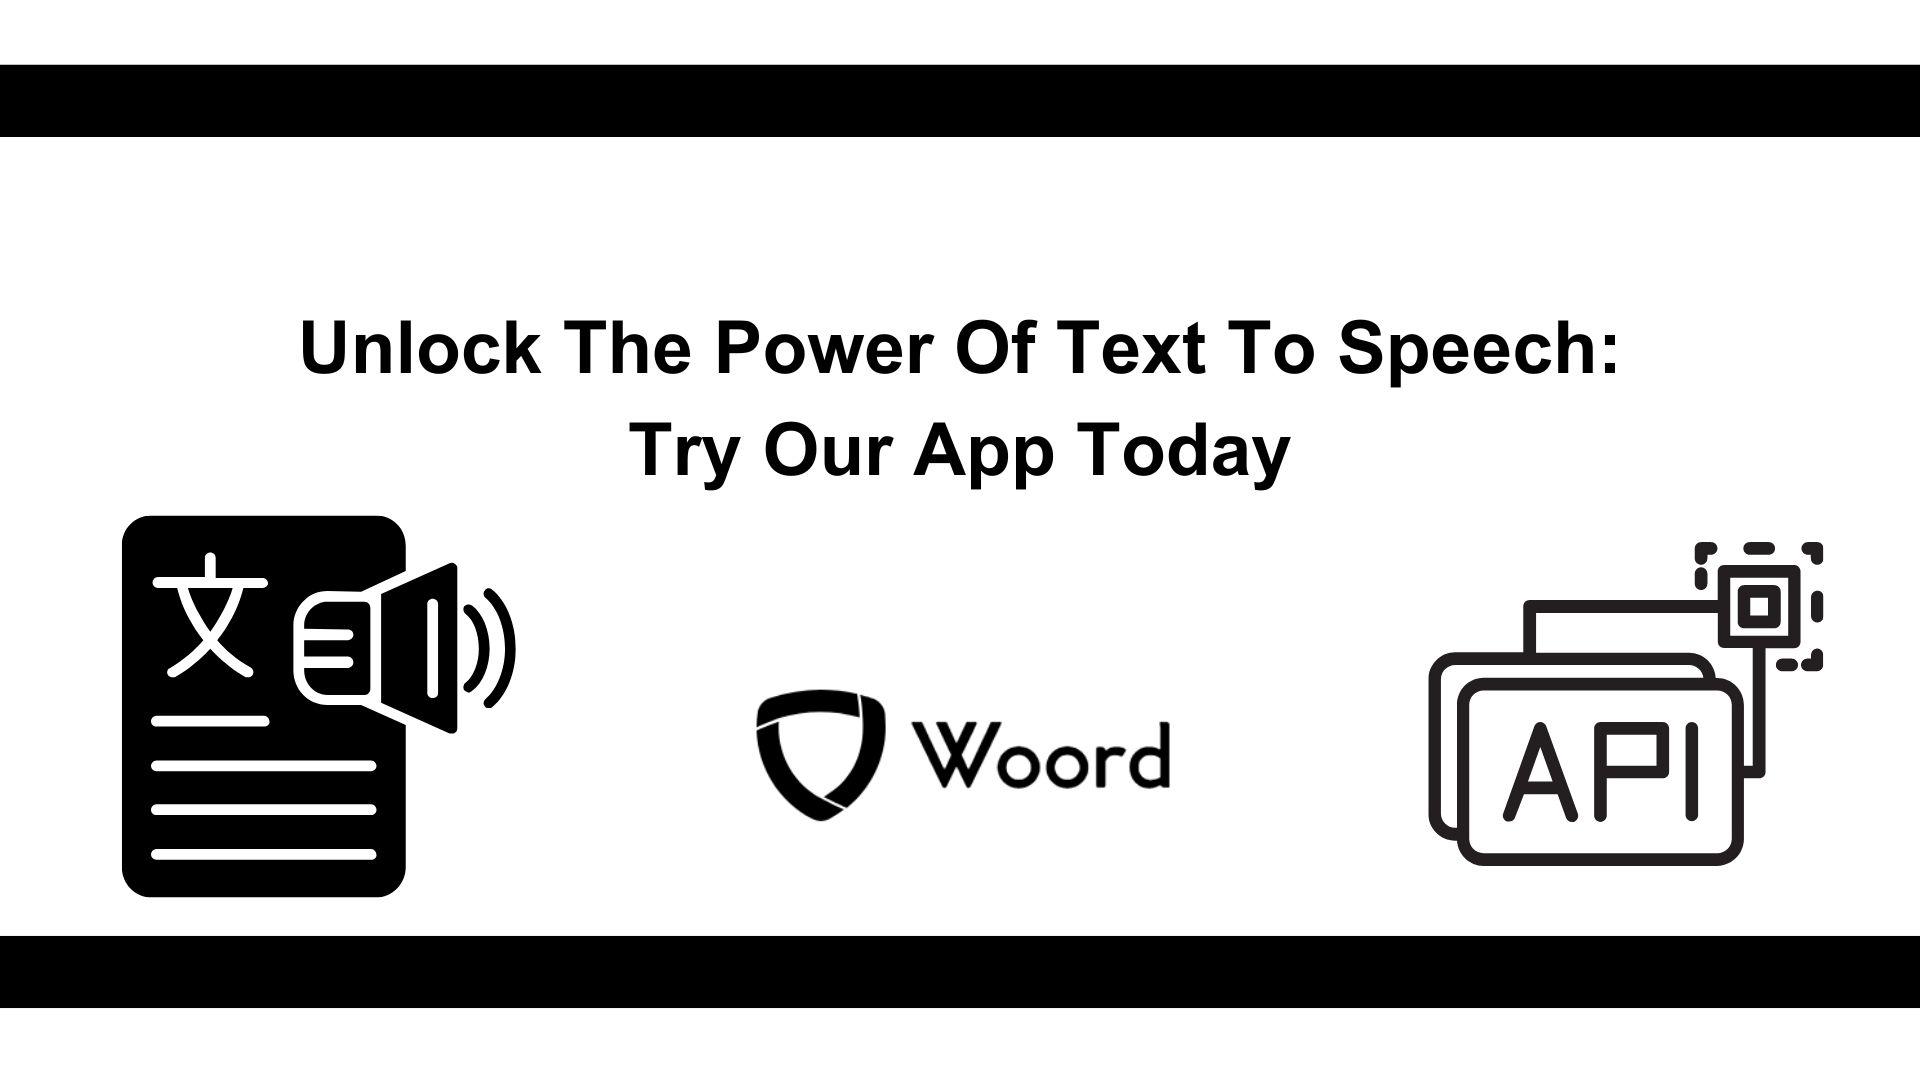 Unlock The Power Of Text To Speech: Try Our App Today